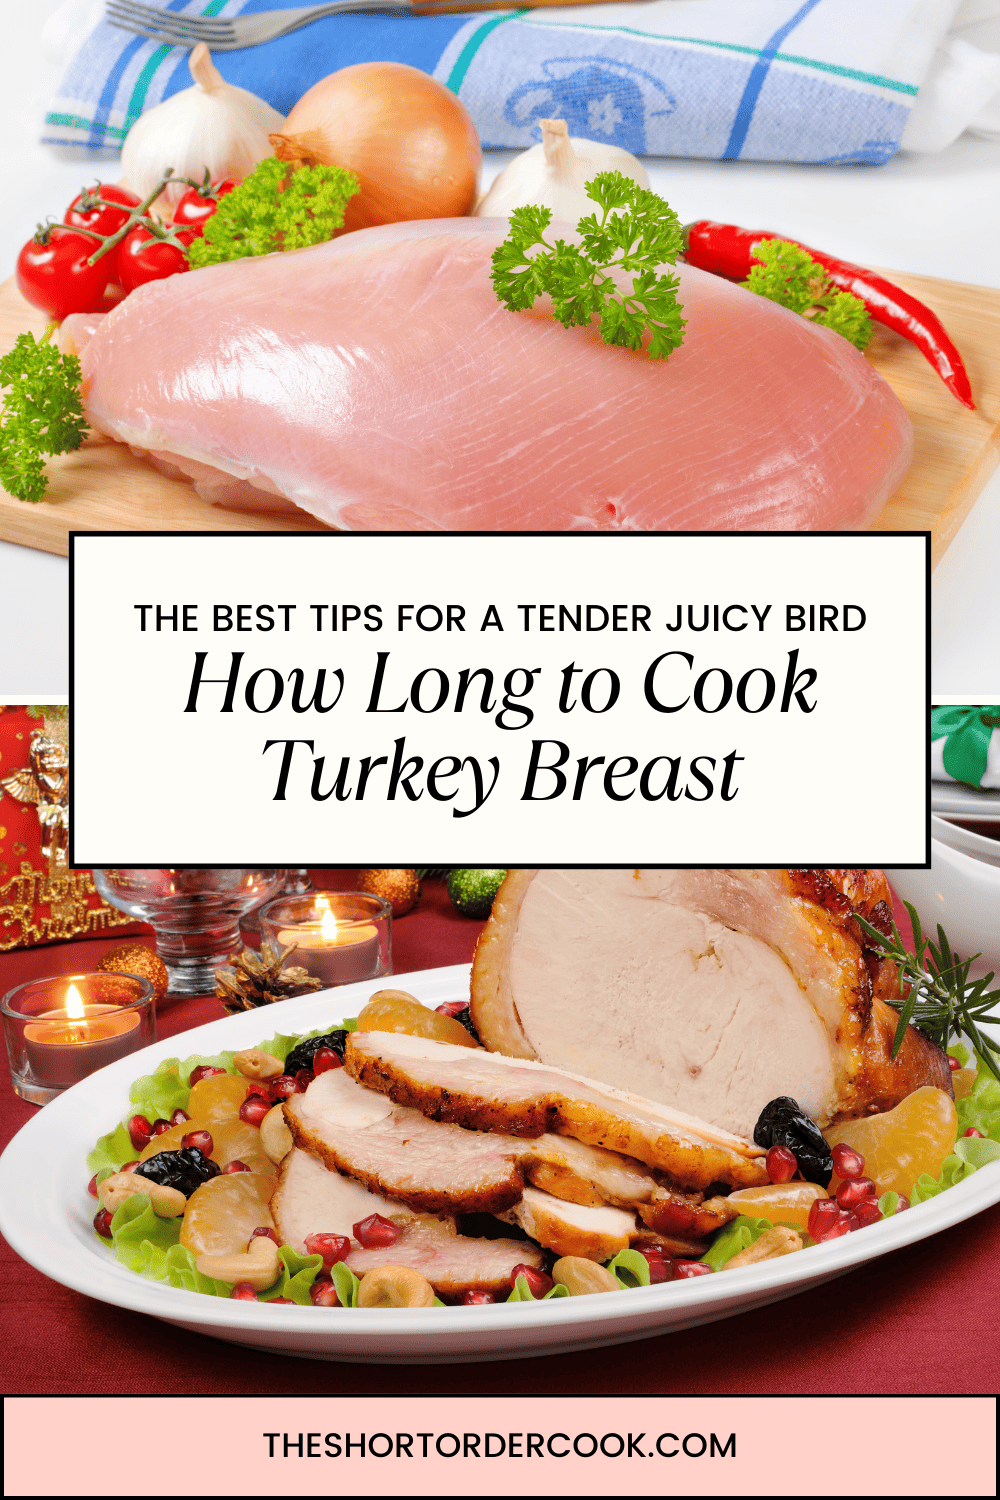 How long to Cook Turkey Breast Two Photos of both a raw and a cooked turkey white meat.